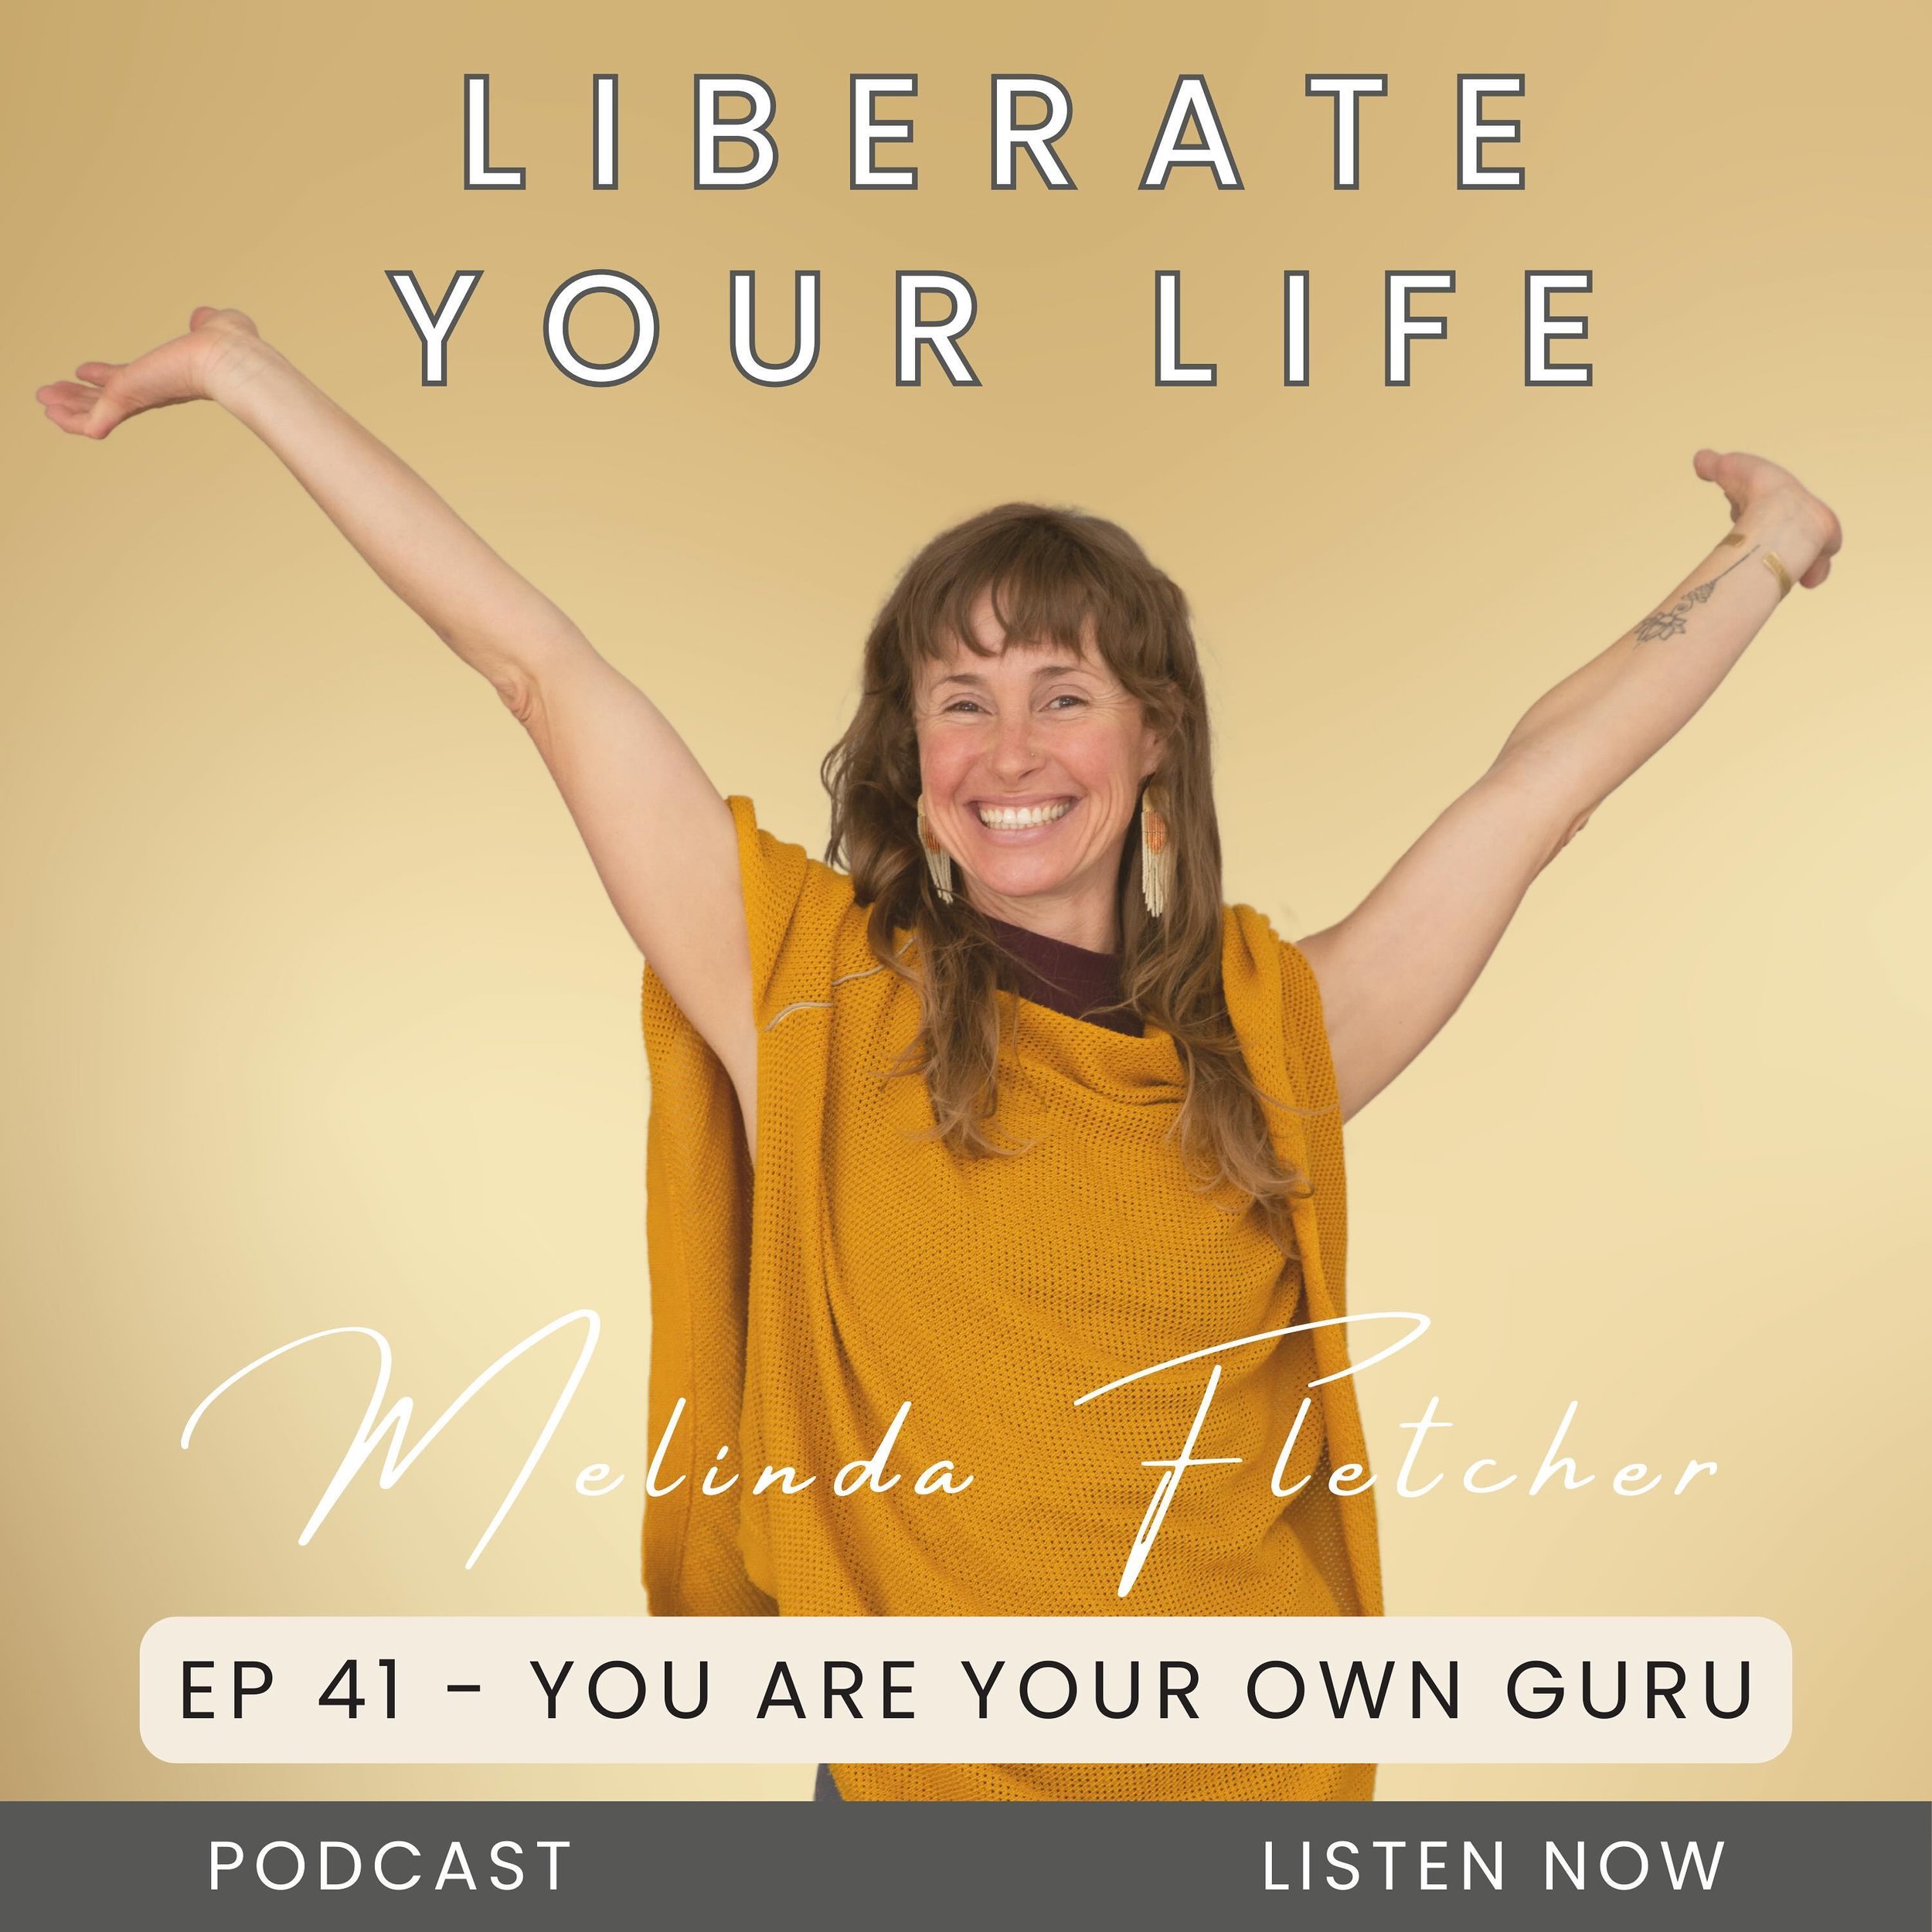 🌸 Spring into Self-Discovery with my Latest Podcast Episode! 🌸

Hello🌿 I&rsquo;m Melinda Fletcher from Sattva Wellness, and I&rsquo;m excited to share my newest episode of the &ldquo;Liberate Your Life&rdquo; podcast. Episode 41, &ldquo;You Are Yo